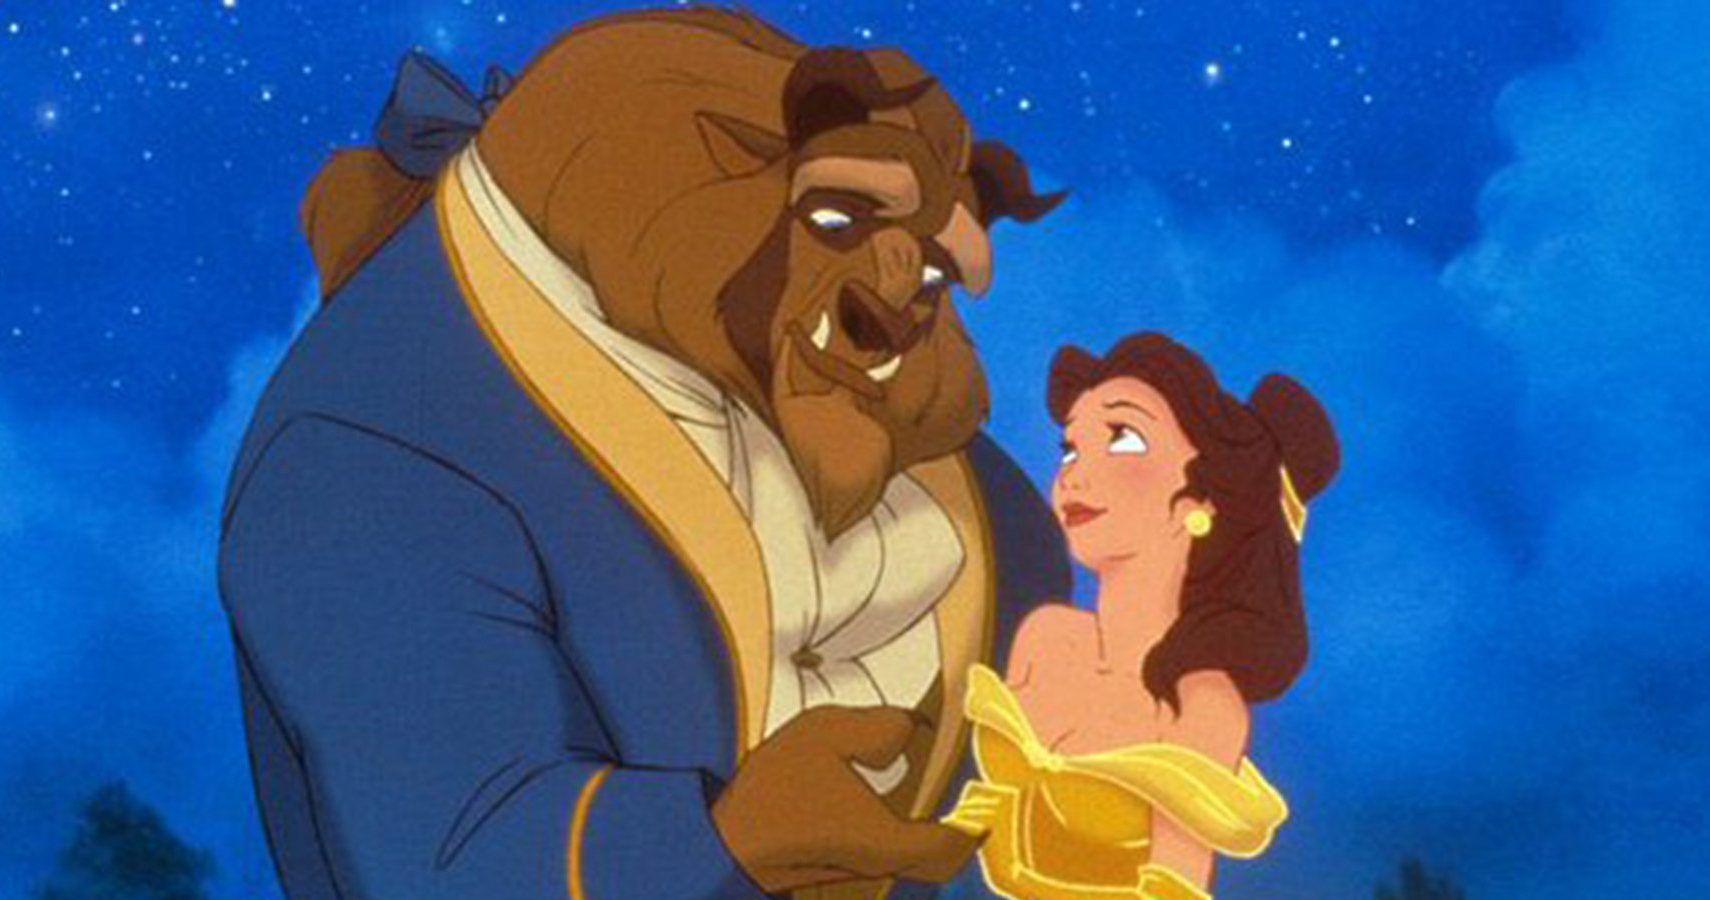 Beauty And The Beast Movie 1991 : 'beauty and the beast' remake cloned